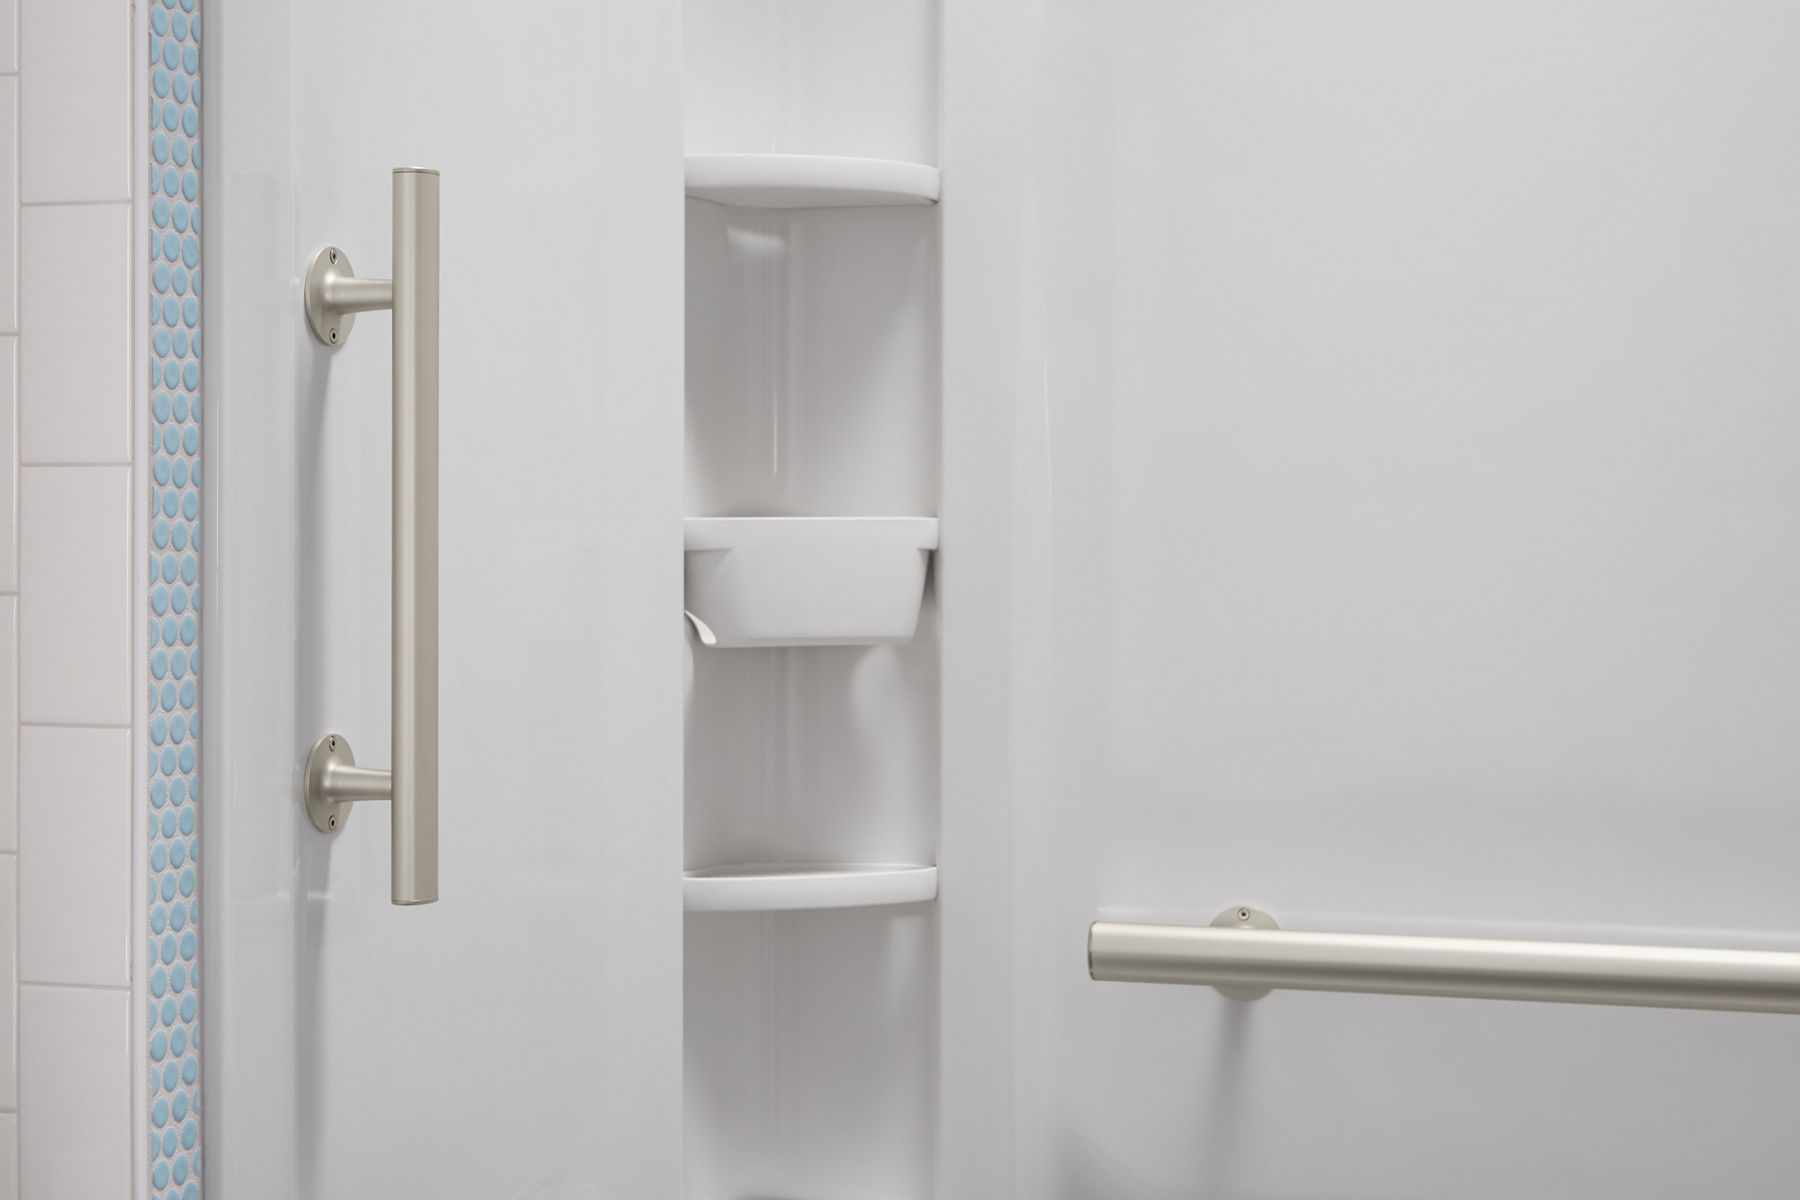 A white shower area with vertical and horizontal grab bars.